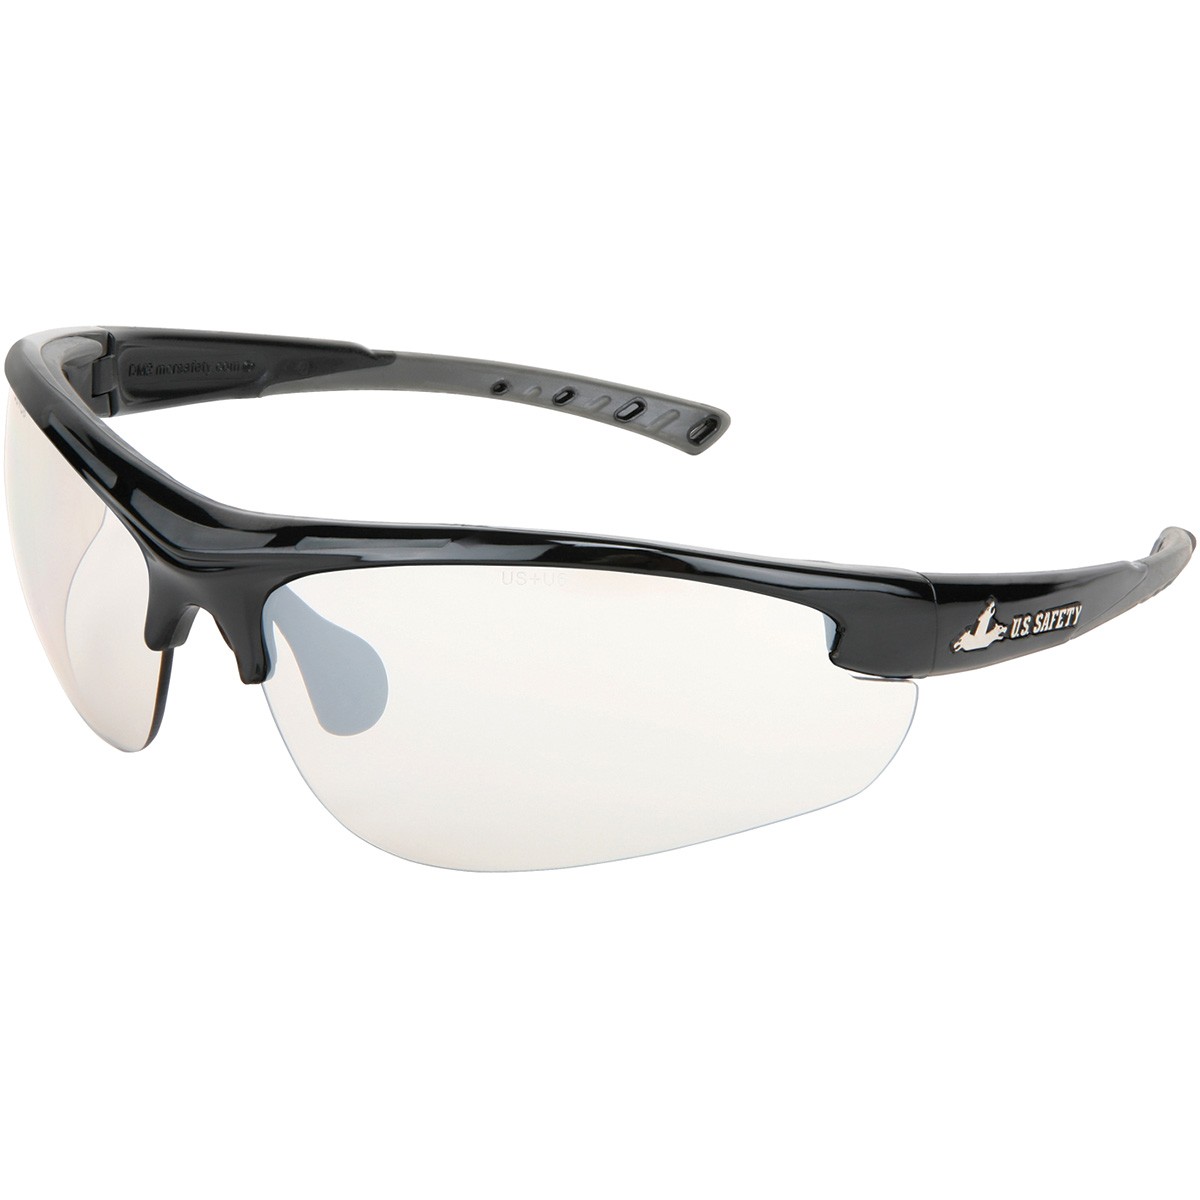 Dominator 2 - Indoor/Outdoor Clear Mirror Lens Safety Glasses - DM1219